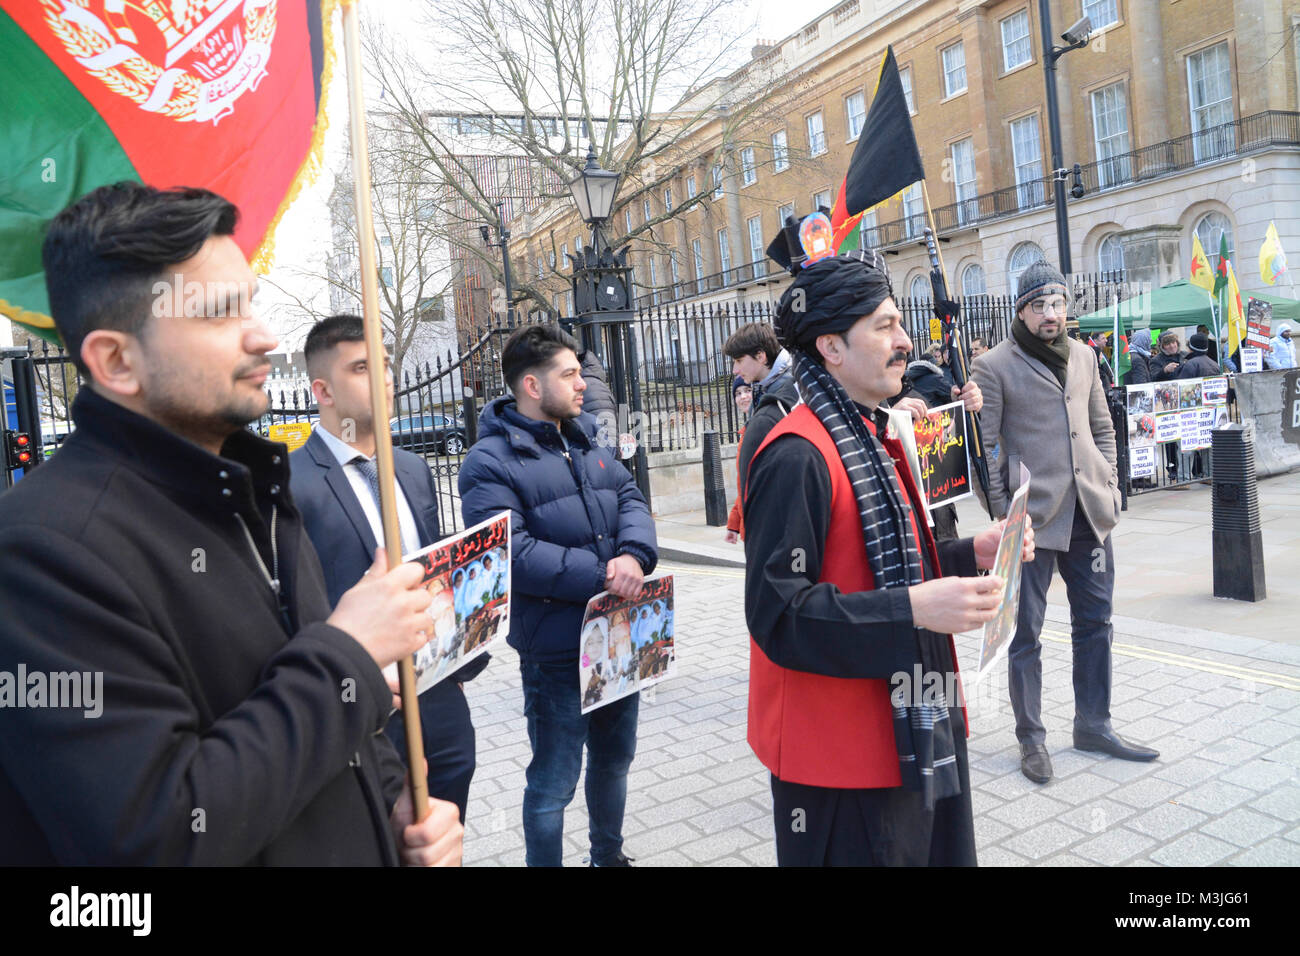 London, UK. 11th February, 2018.  Peaceful Protest in solidarity with the Pashtun sit-in in Islamabad where thousands of Pashtuns are sitting despite the extreme weather to demand:  1. An end to ethnic genocide of Pashtuns by Pakistani establishment of elite Punjabis.  2. An end to state sponsor of terrorists groups inside tribal belt and Afghanistan.   3. Judicial inquiry into the death of Naqeebullah Mehsud and all those murdered in fake encounters by police extra judicially.   Credit: Philip Robins/Alamy Live News Stock Photo